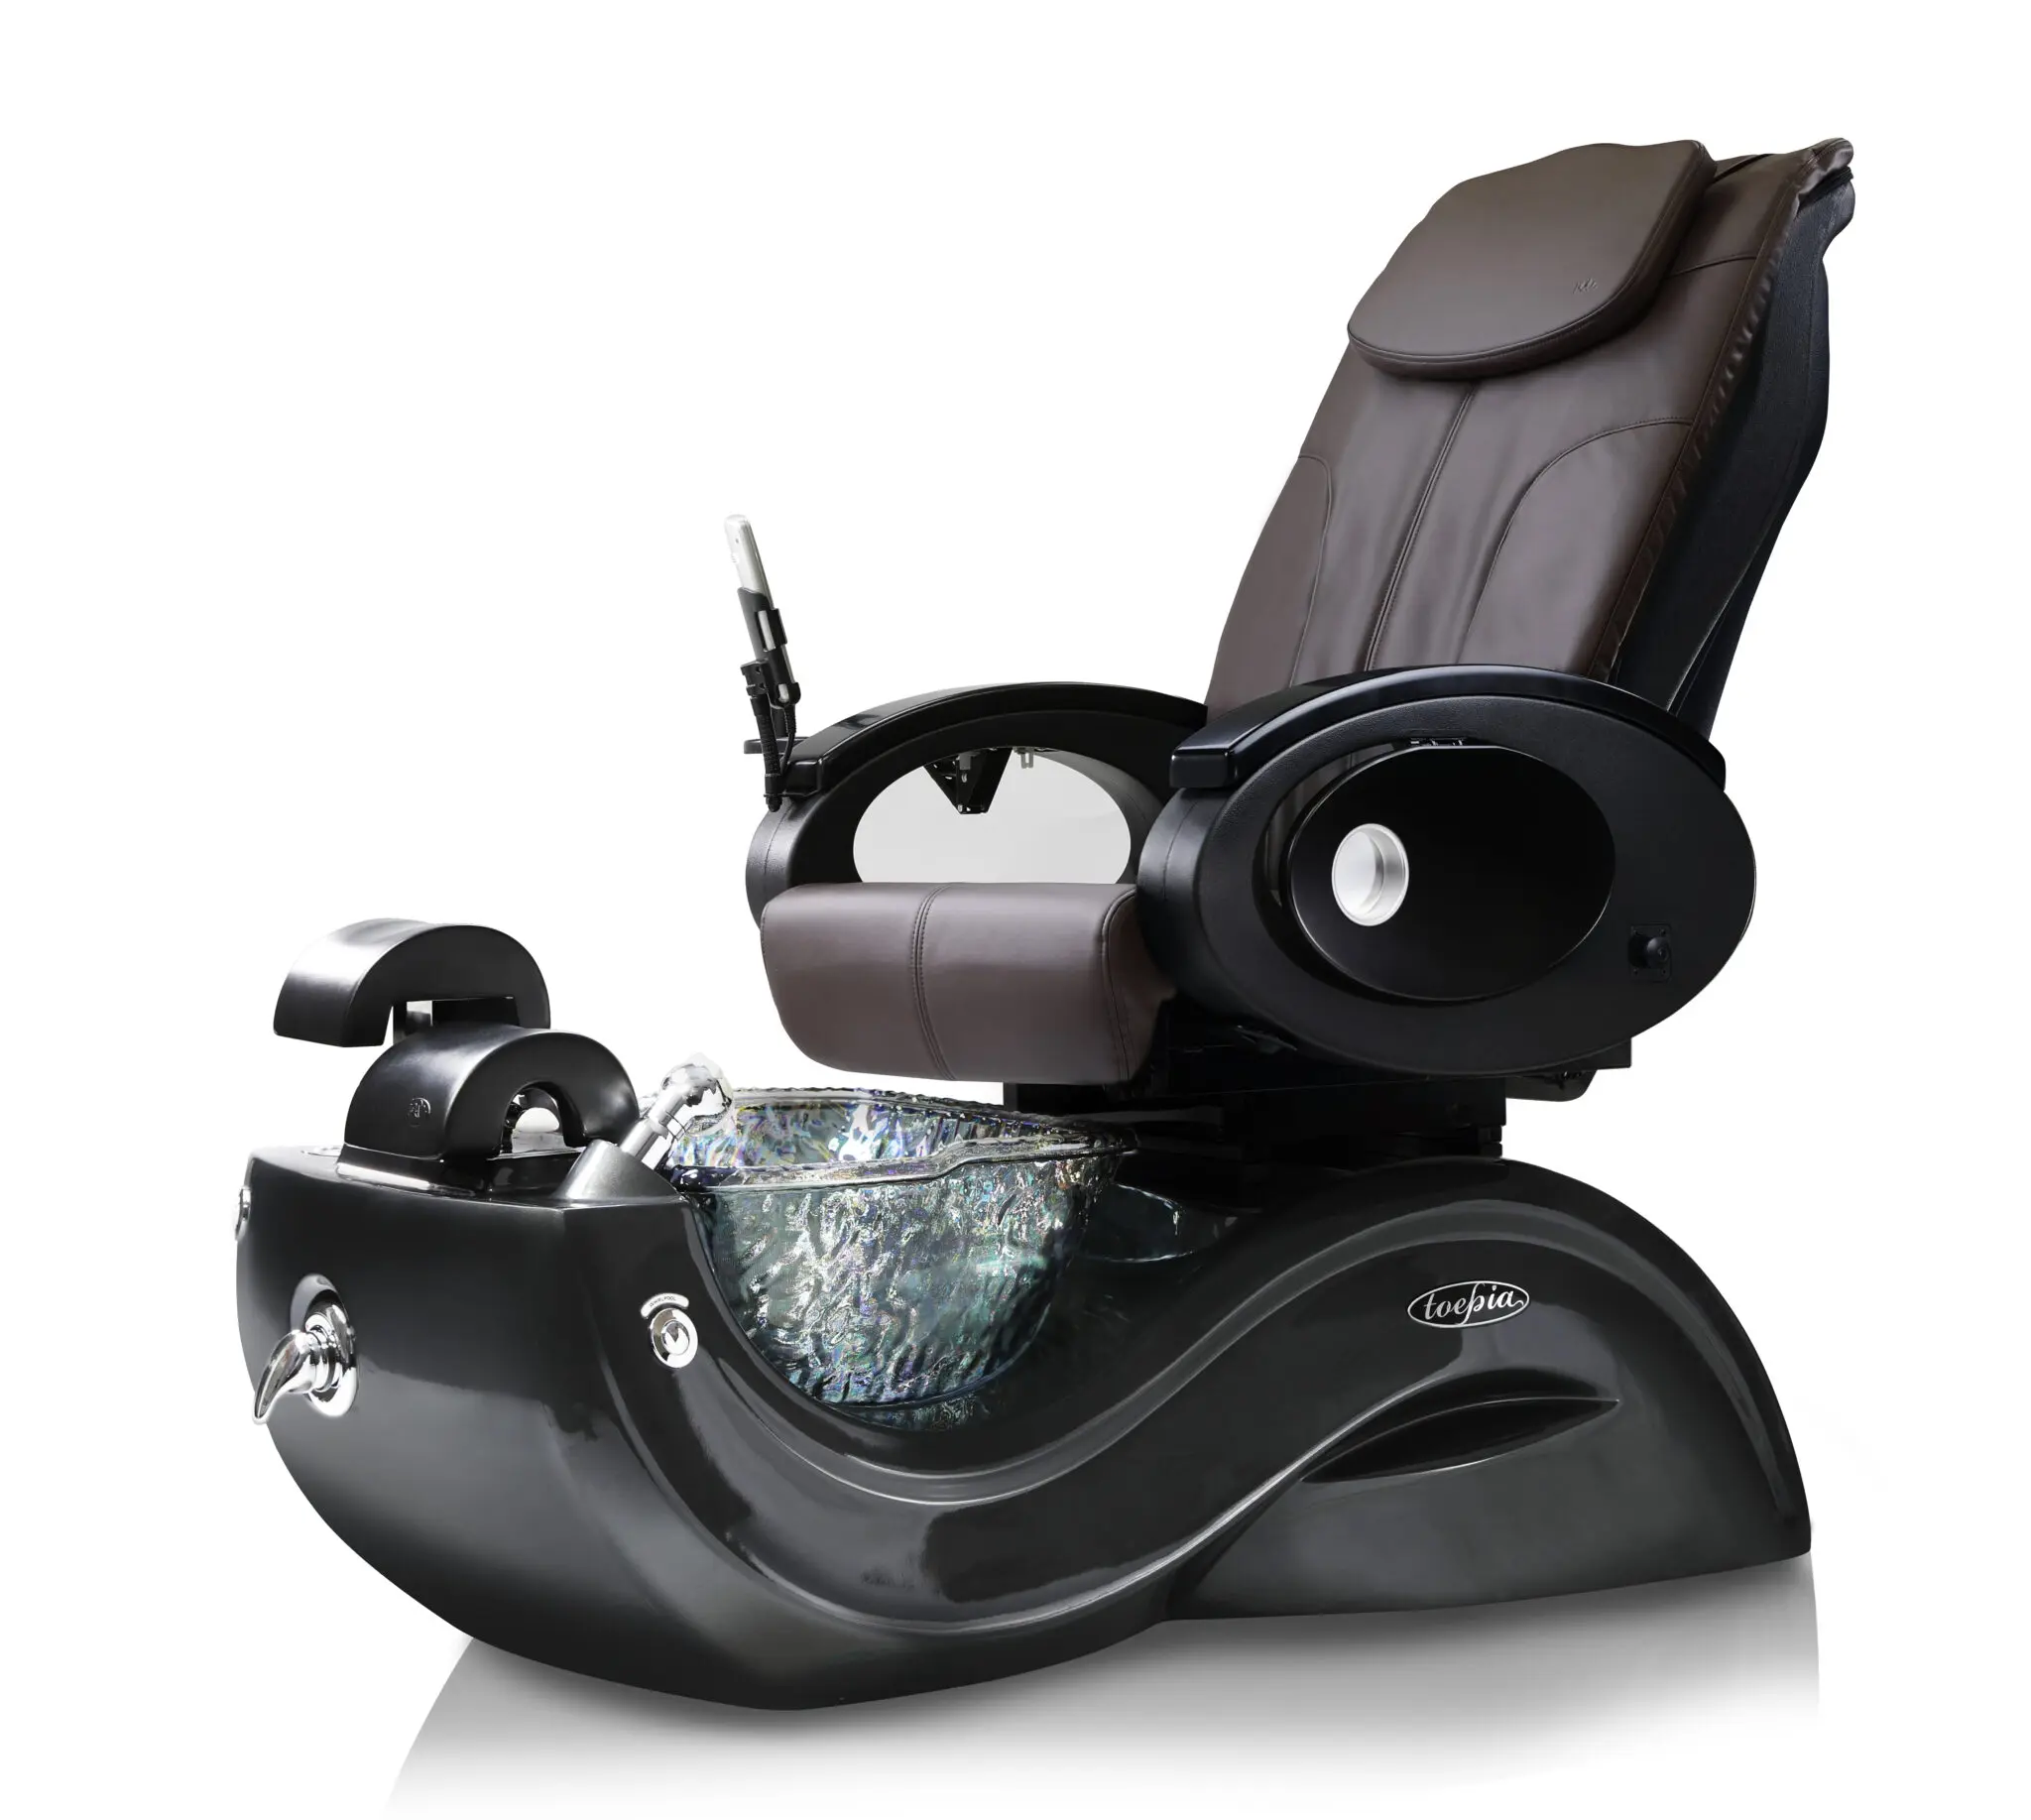 Toepia-Chocolate-Gray Pedicure Spa Chair - J & A Pedicure Spa Chair & Furniture Collection